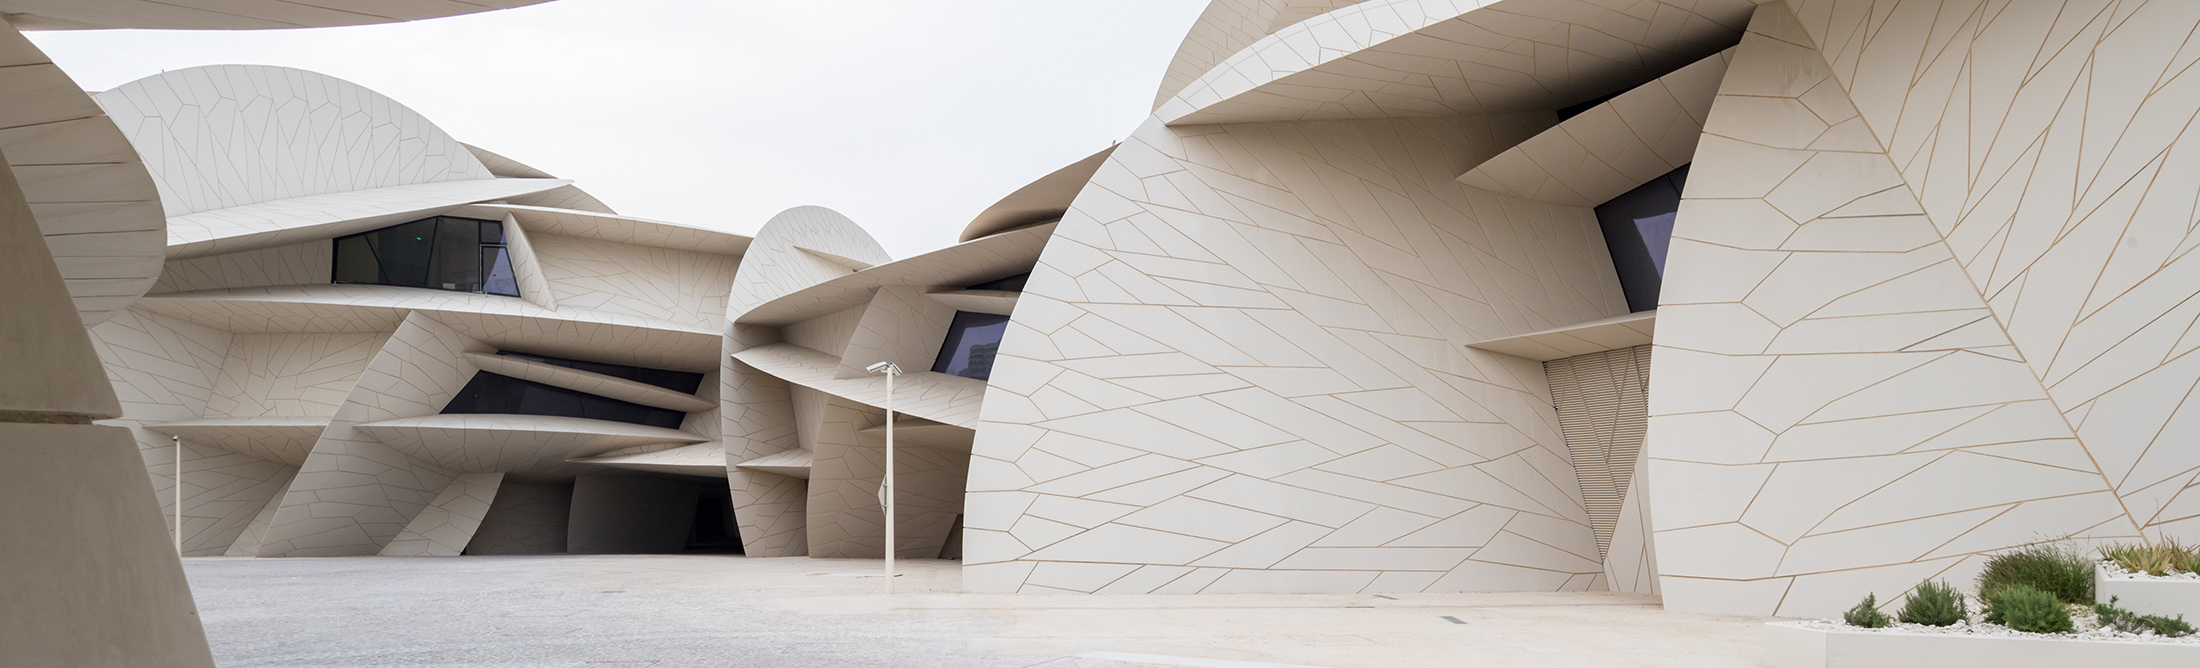 A First Look Inside the New National Museum of Qatar: Photos - Bloomberg